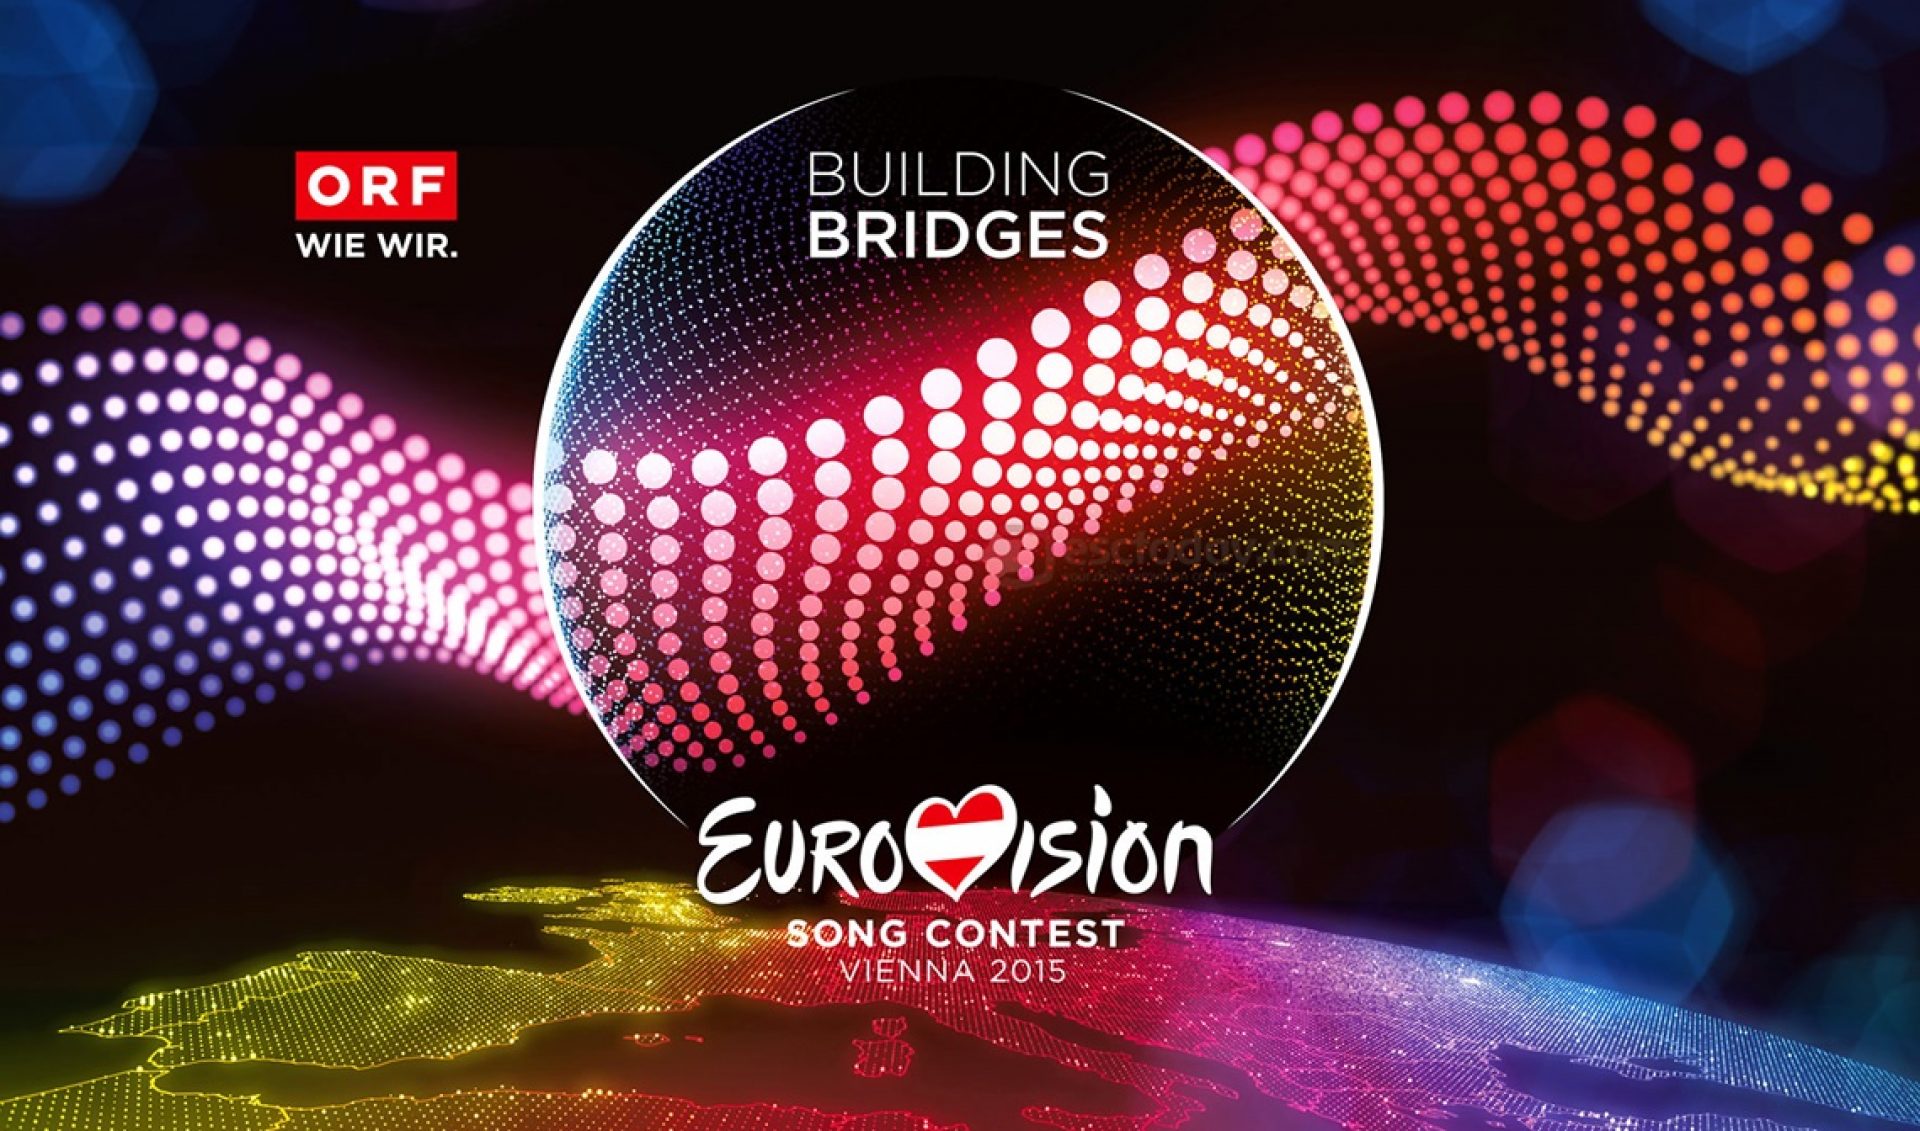 Eurovision Streaming Live